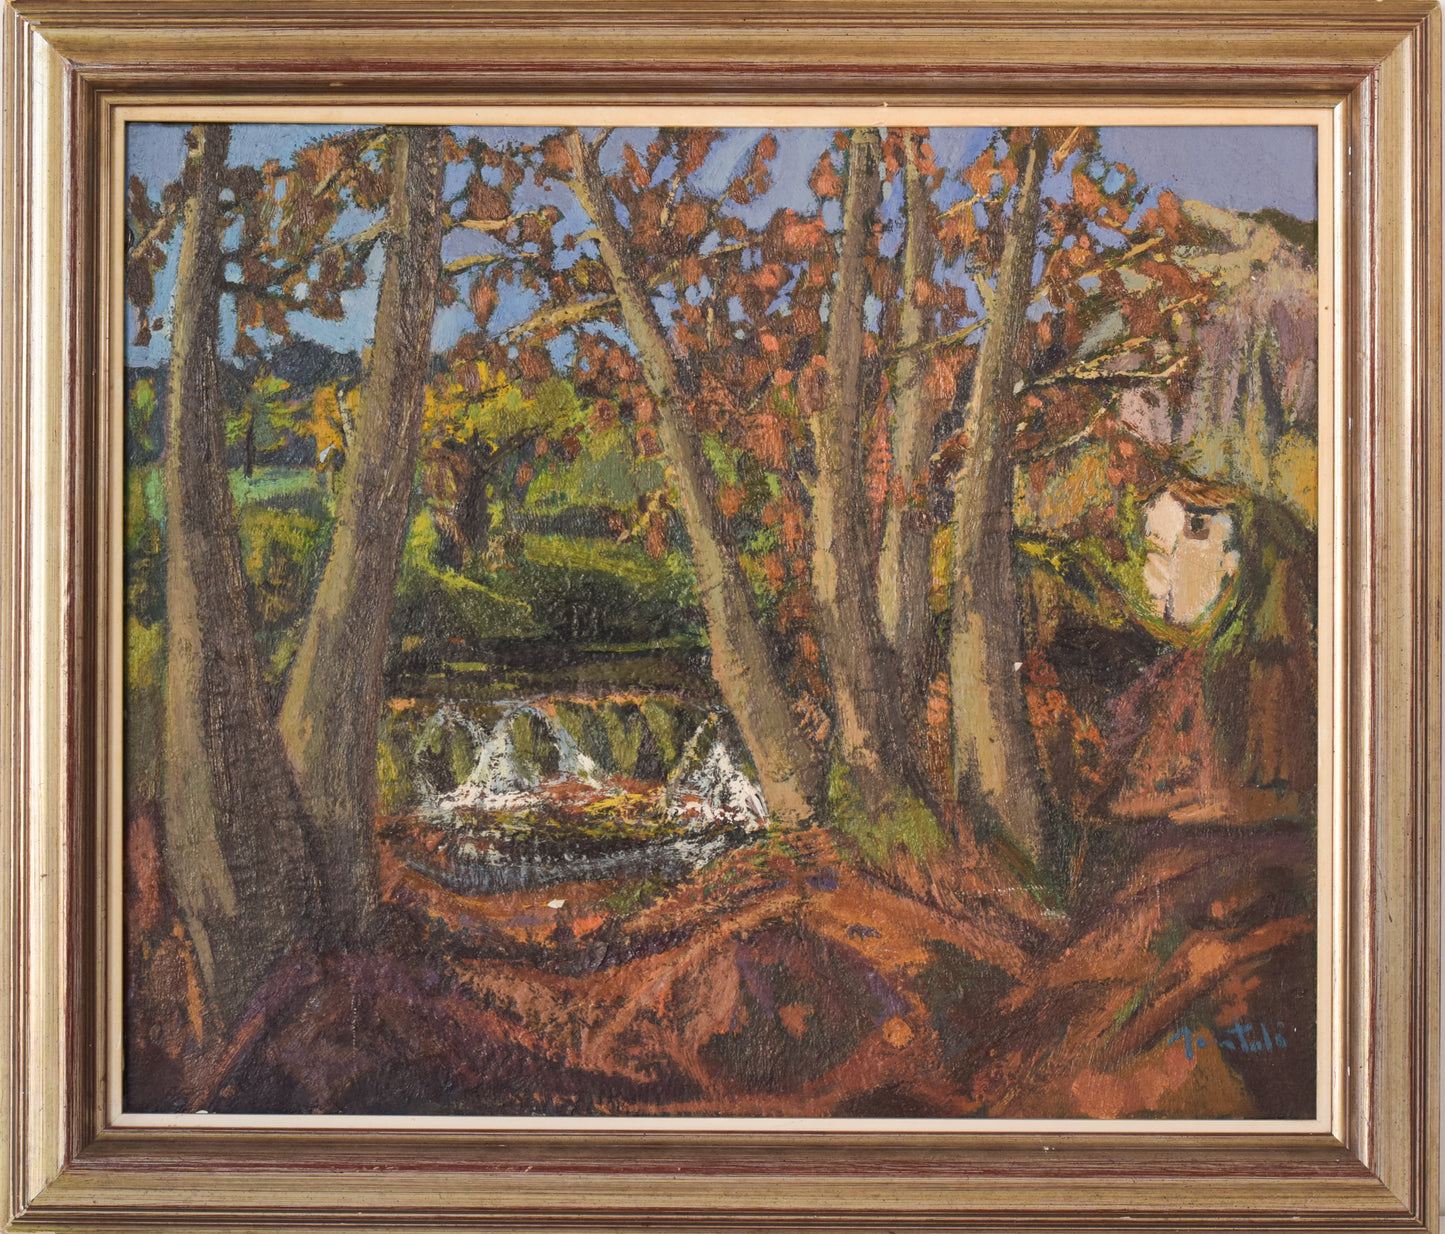 Framed Signed Post Impressionist Oil on Canvas of Trees and Waterfall